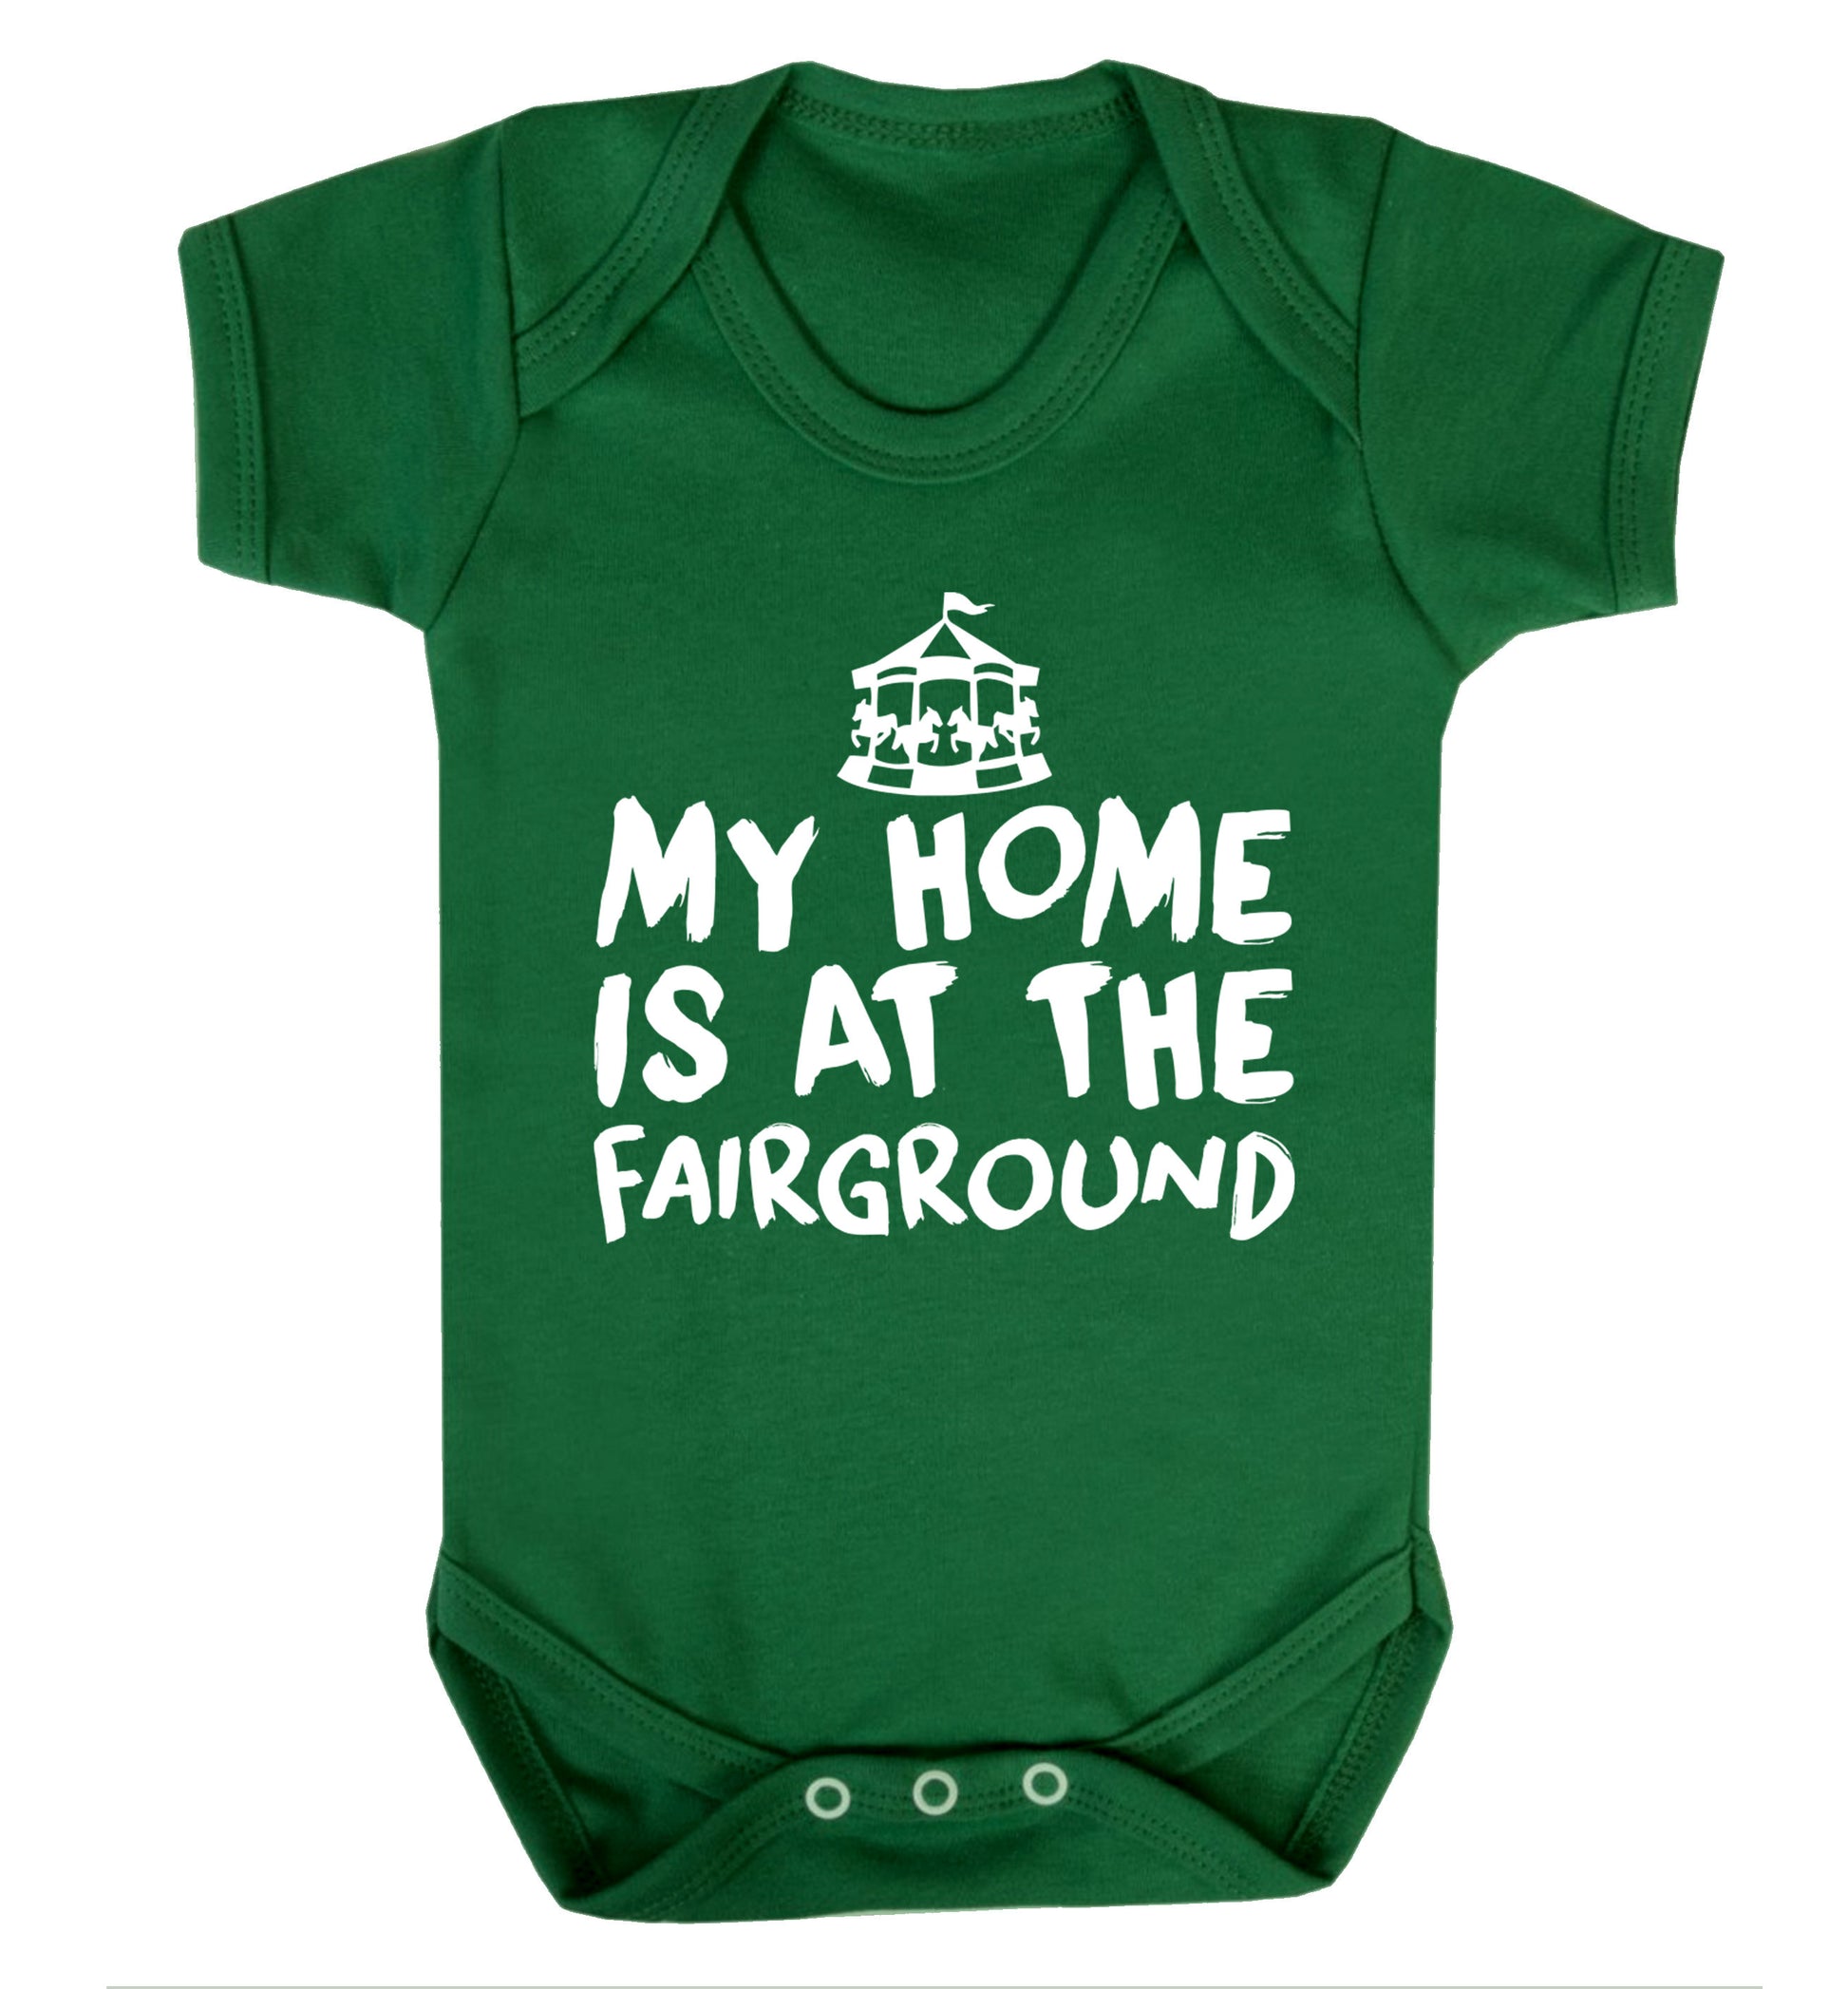 My home is at the fairground Baby Vest green 18-24 months